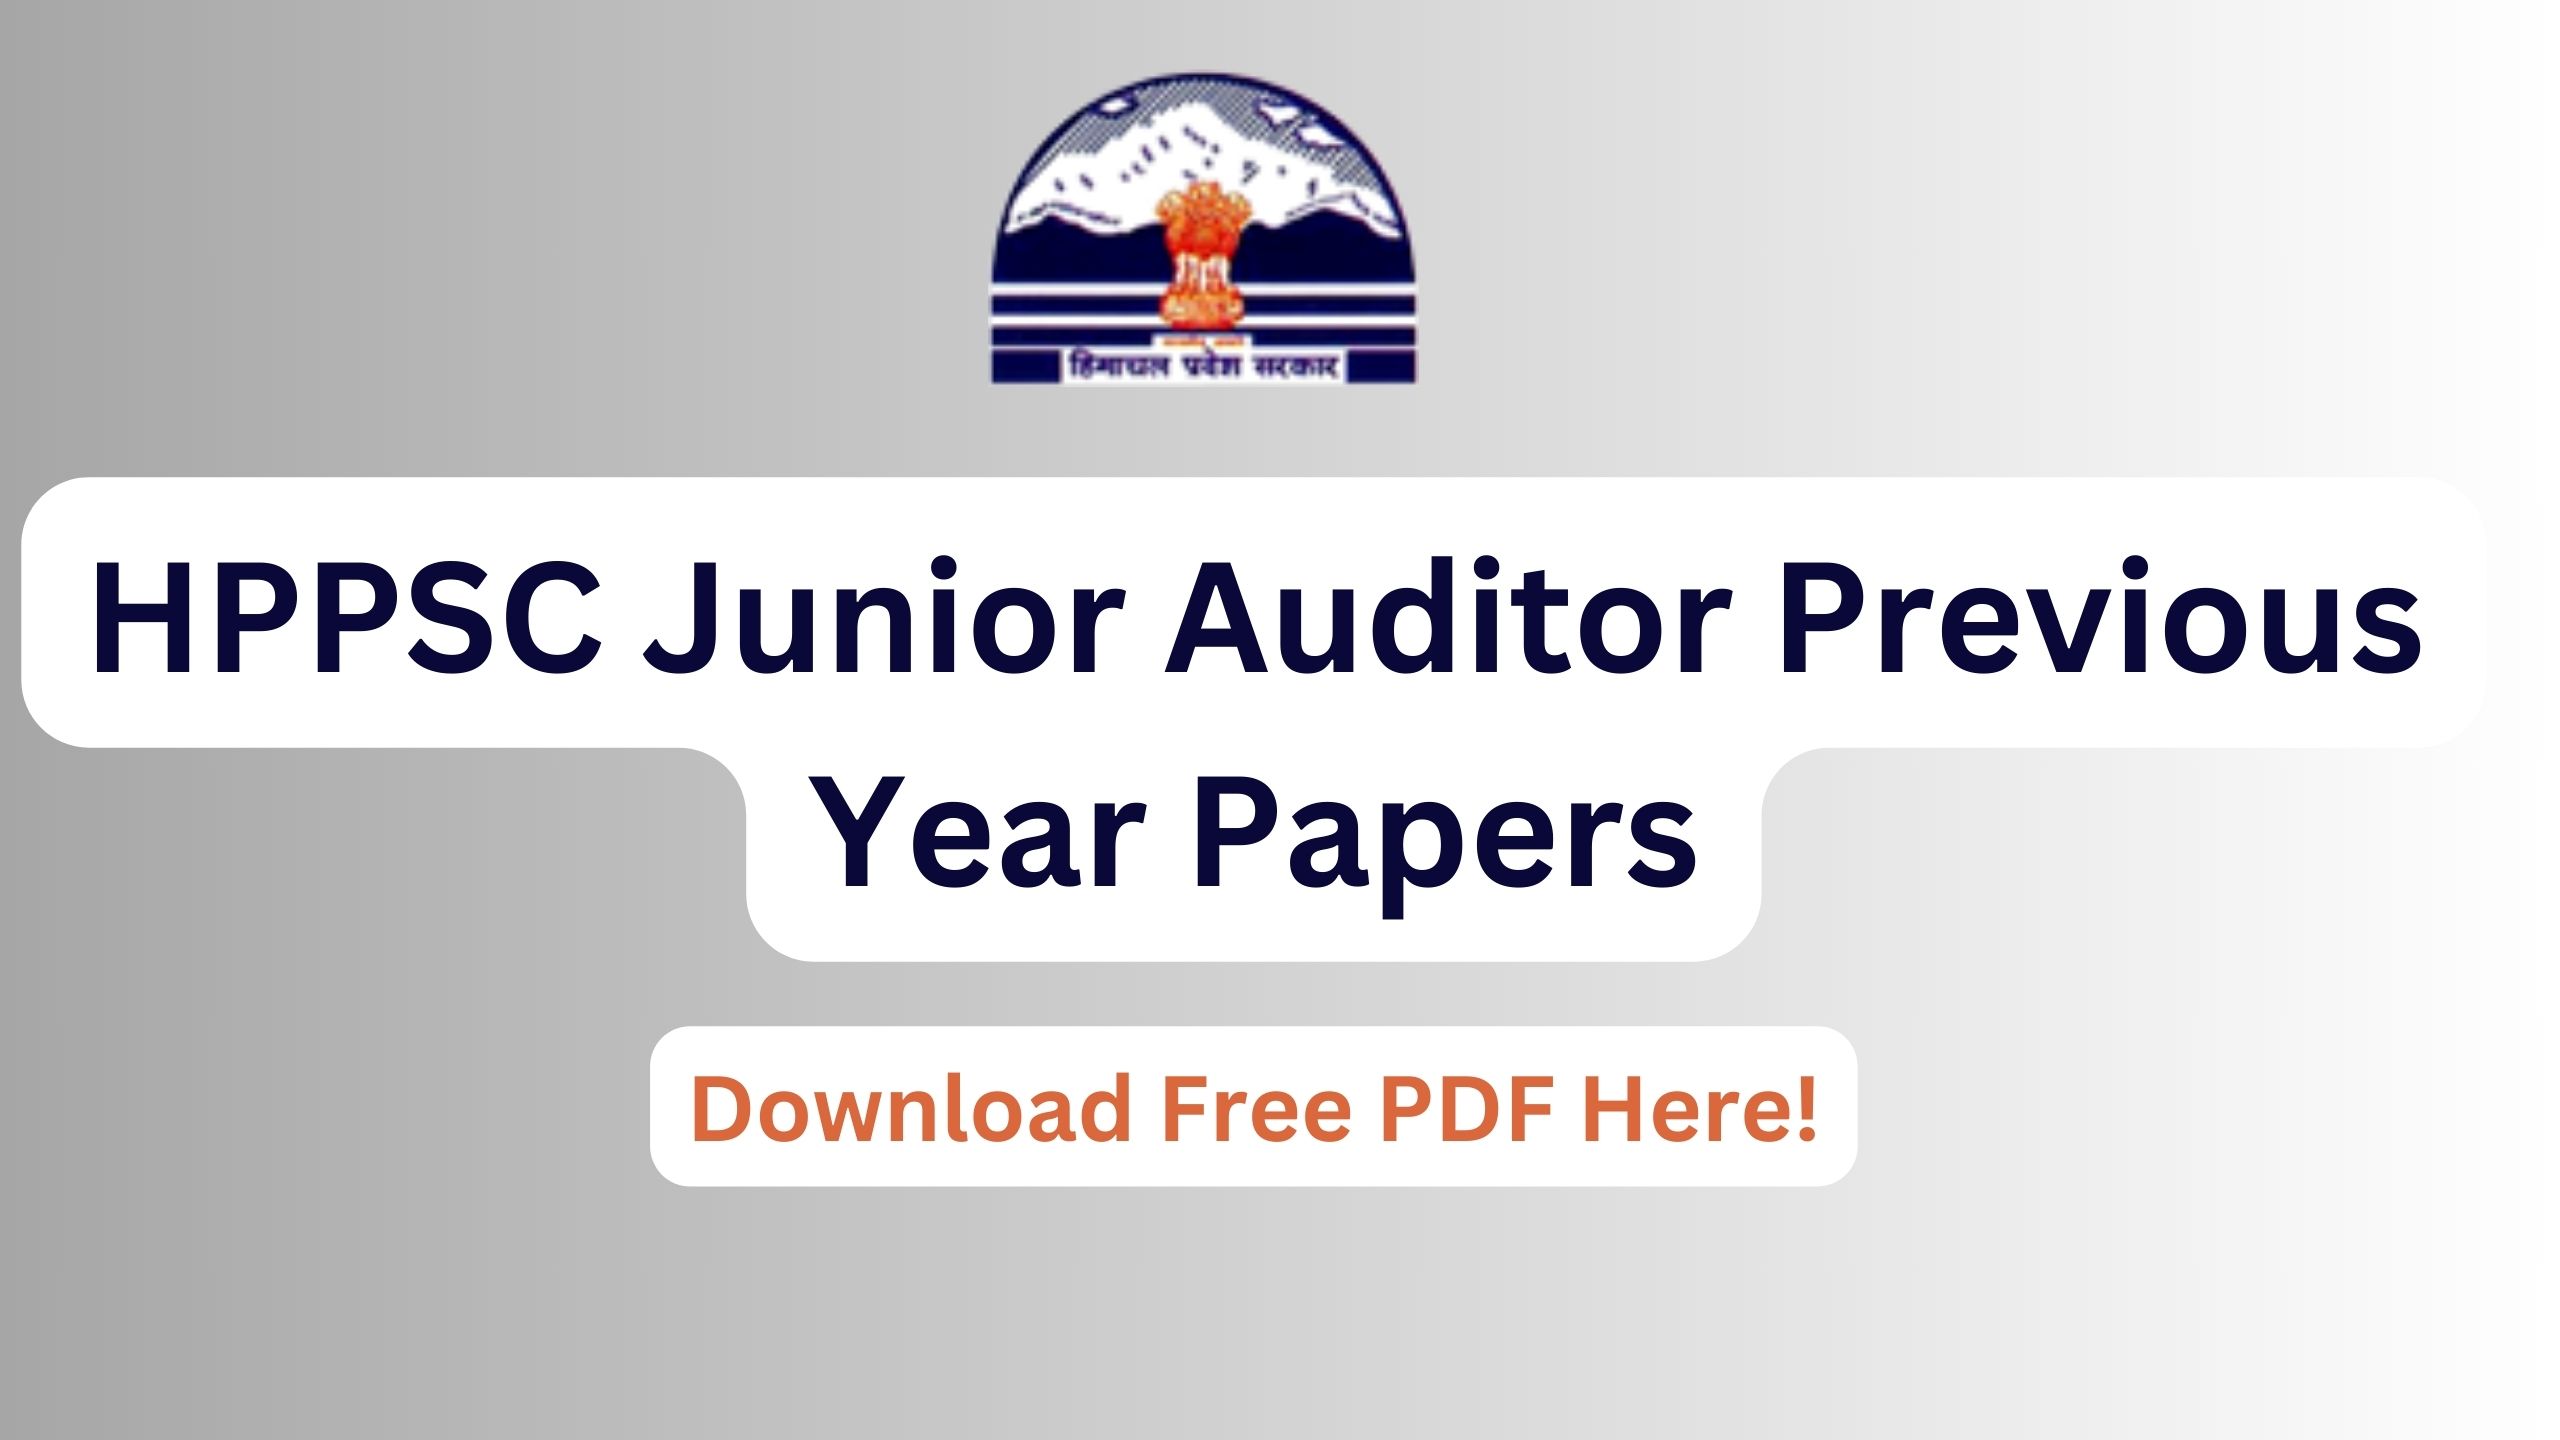 HPPSC Junior Auditor Previous Year Papers